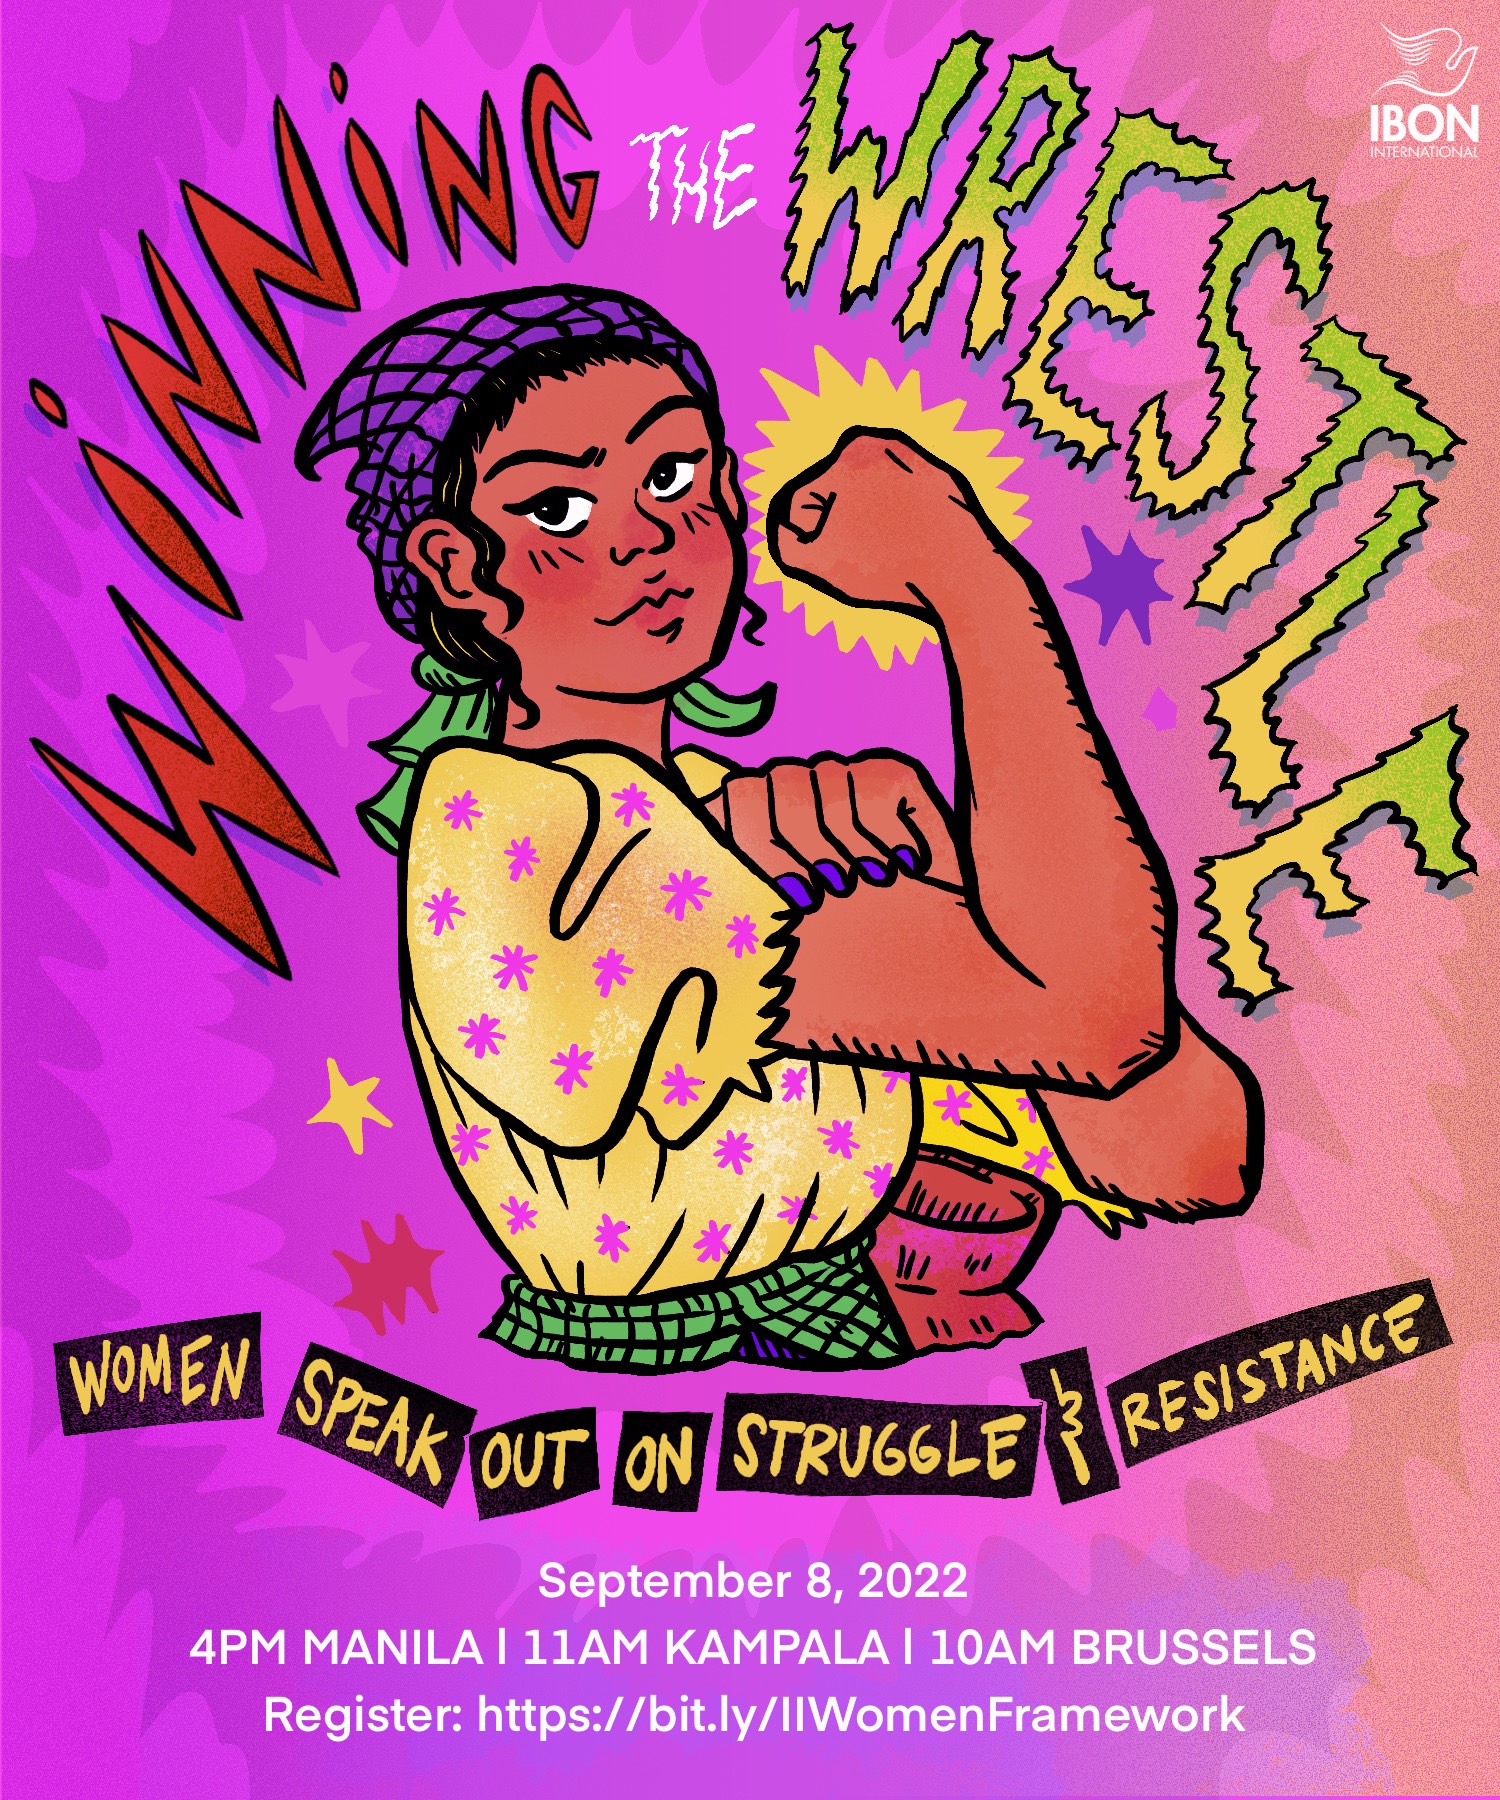 You are currently viewing [EVENT] Winning the wrestle: Women speak out on struggle and resistance